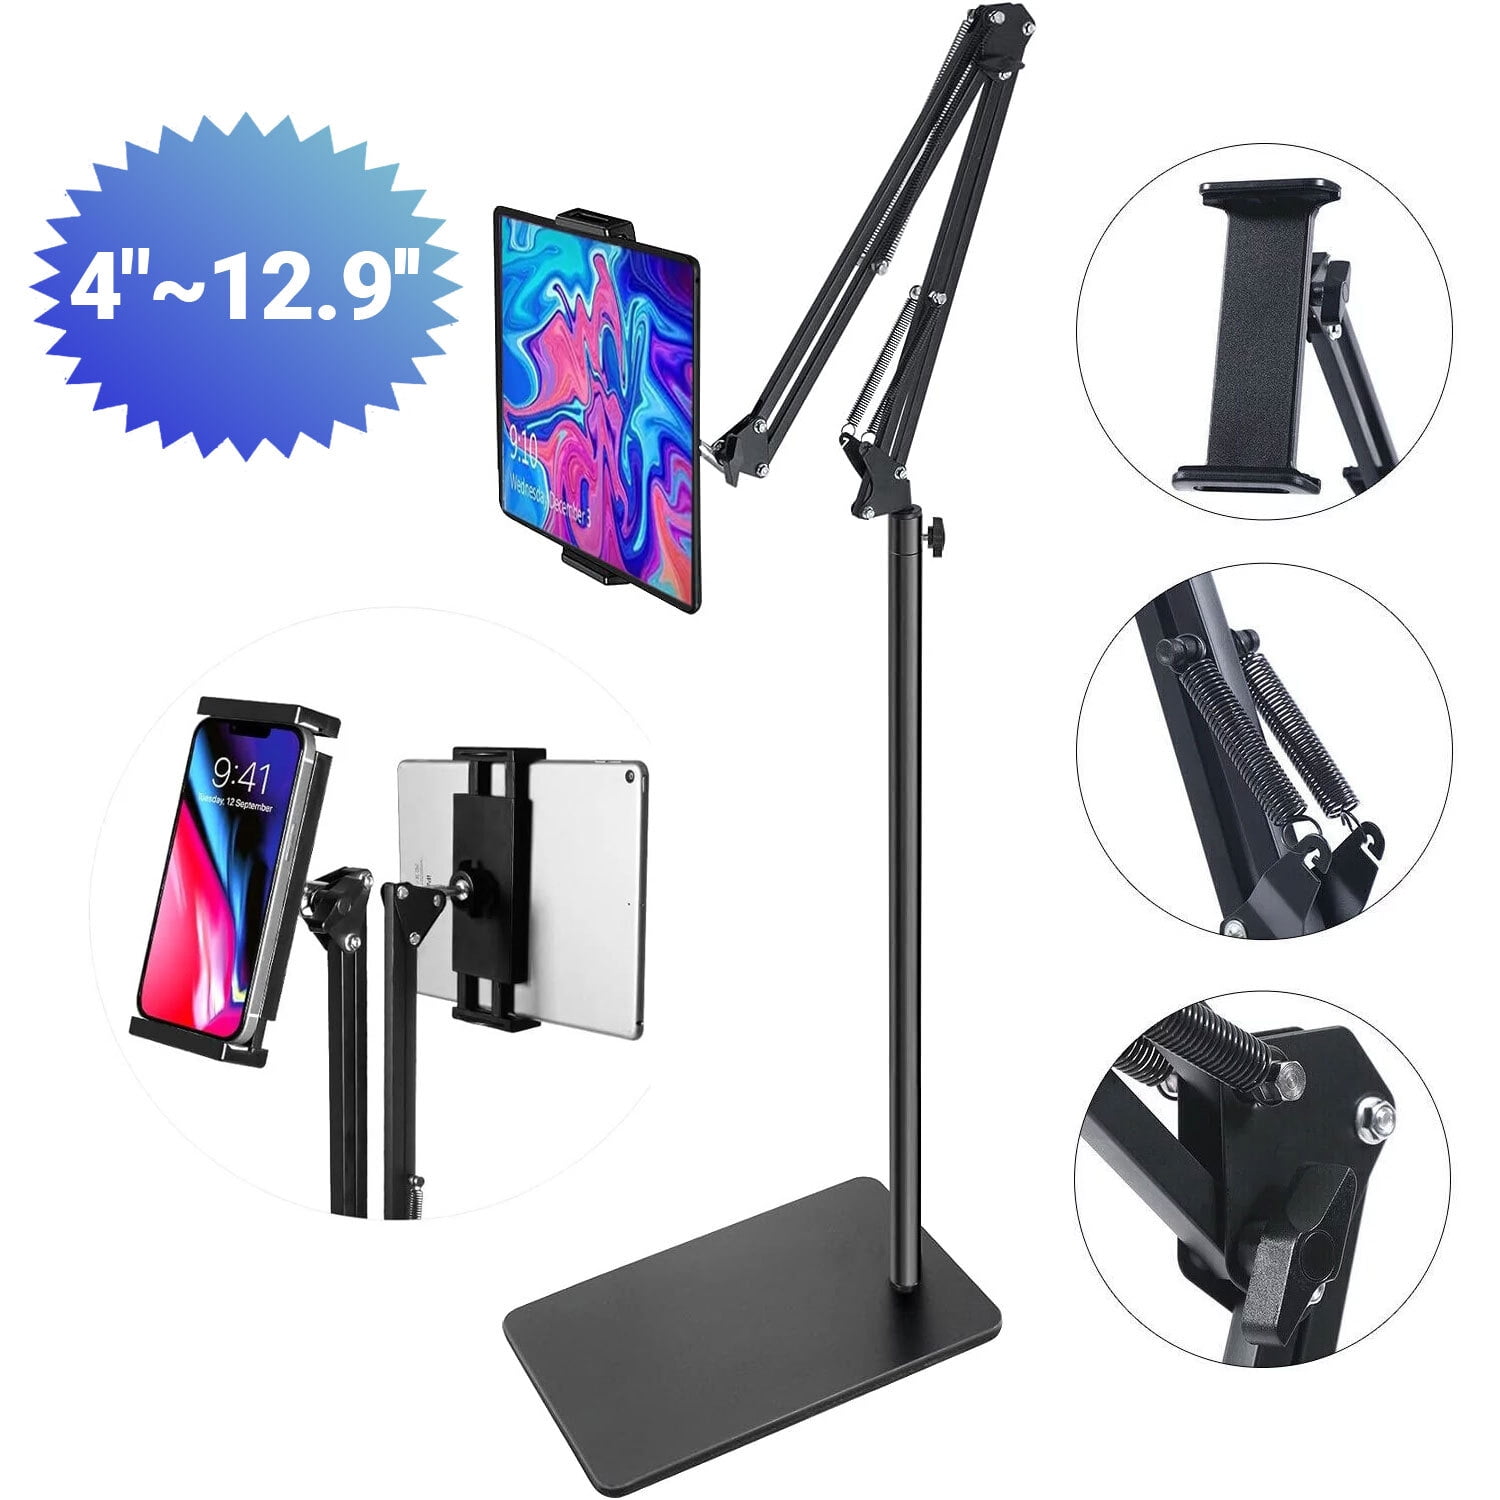 Lamicall Gooseneck Tablet Holder, Tablet Stand : Flexible Arm Clip Tablet  Mount Compatible with iPad Mini Pro Air, Switch, Galaxy Tabs, More  4.7-10.5